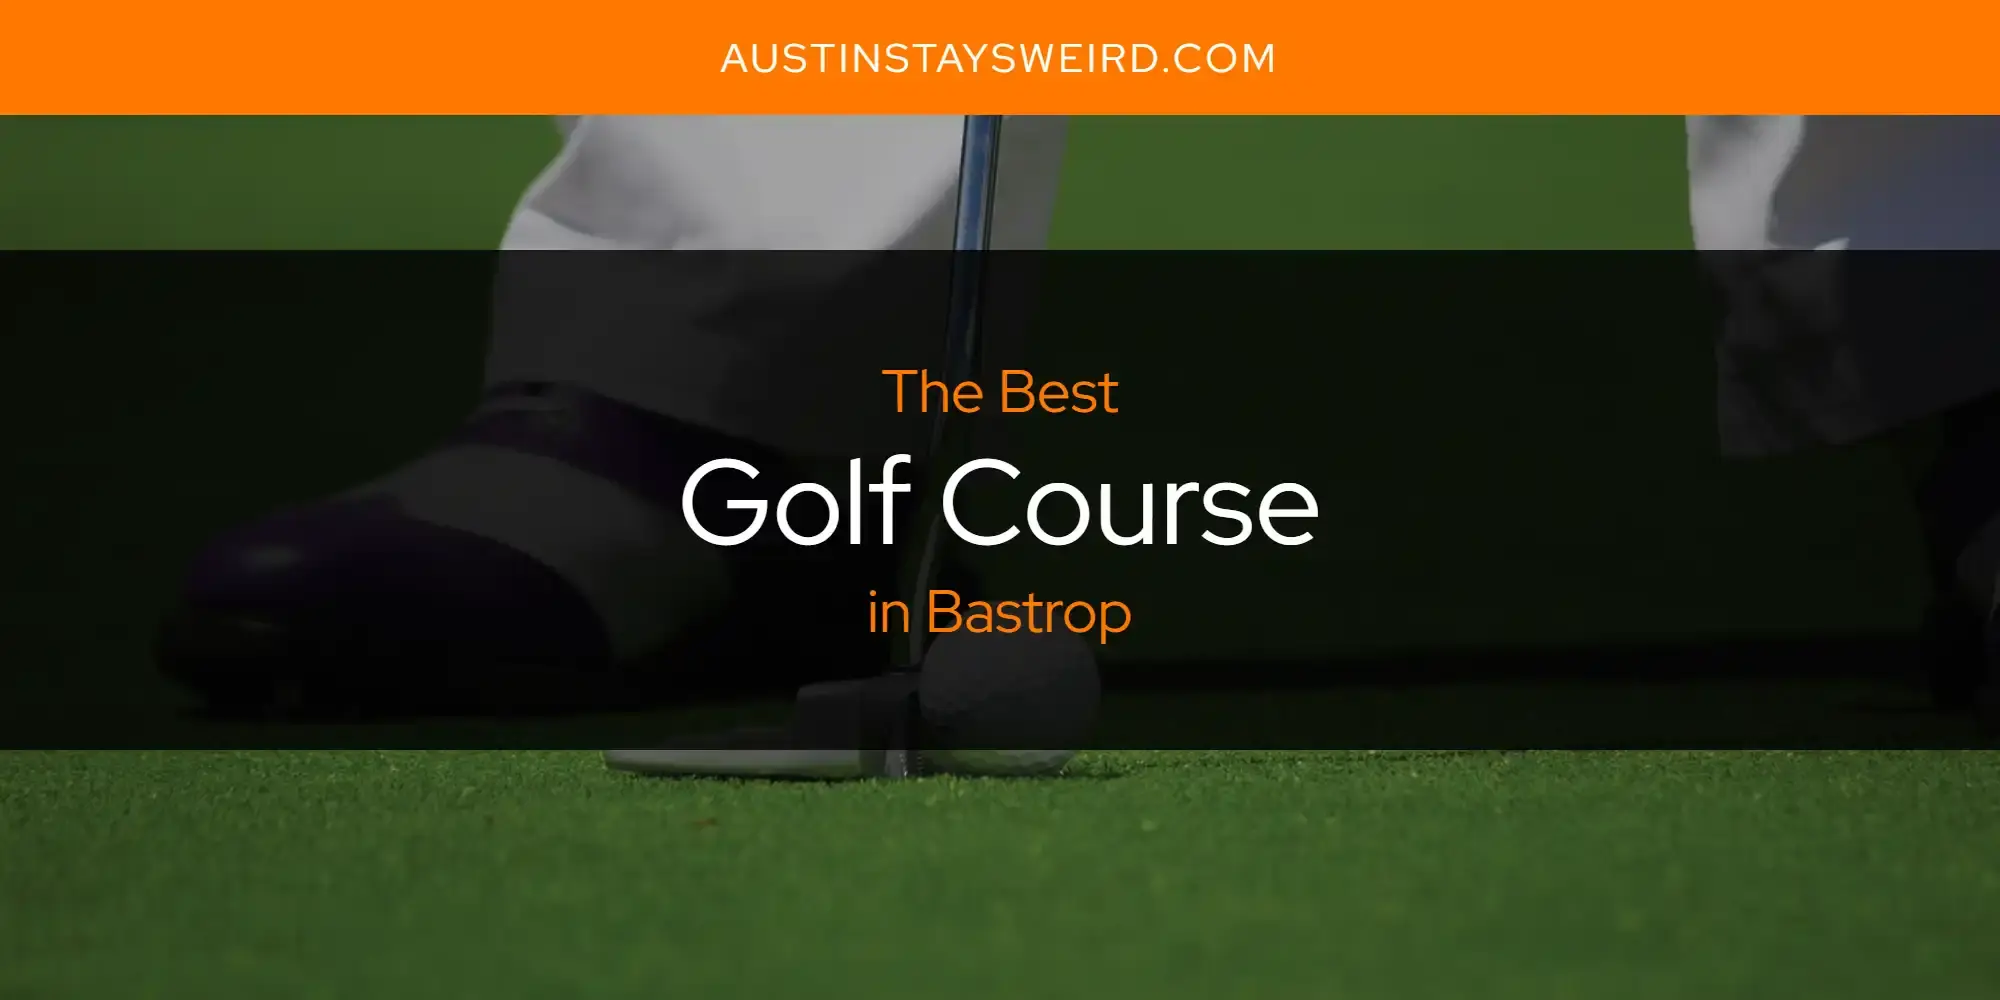 Best Golf Course in Bastrop? Here's the Top 8